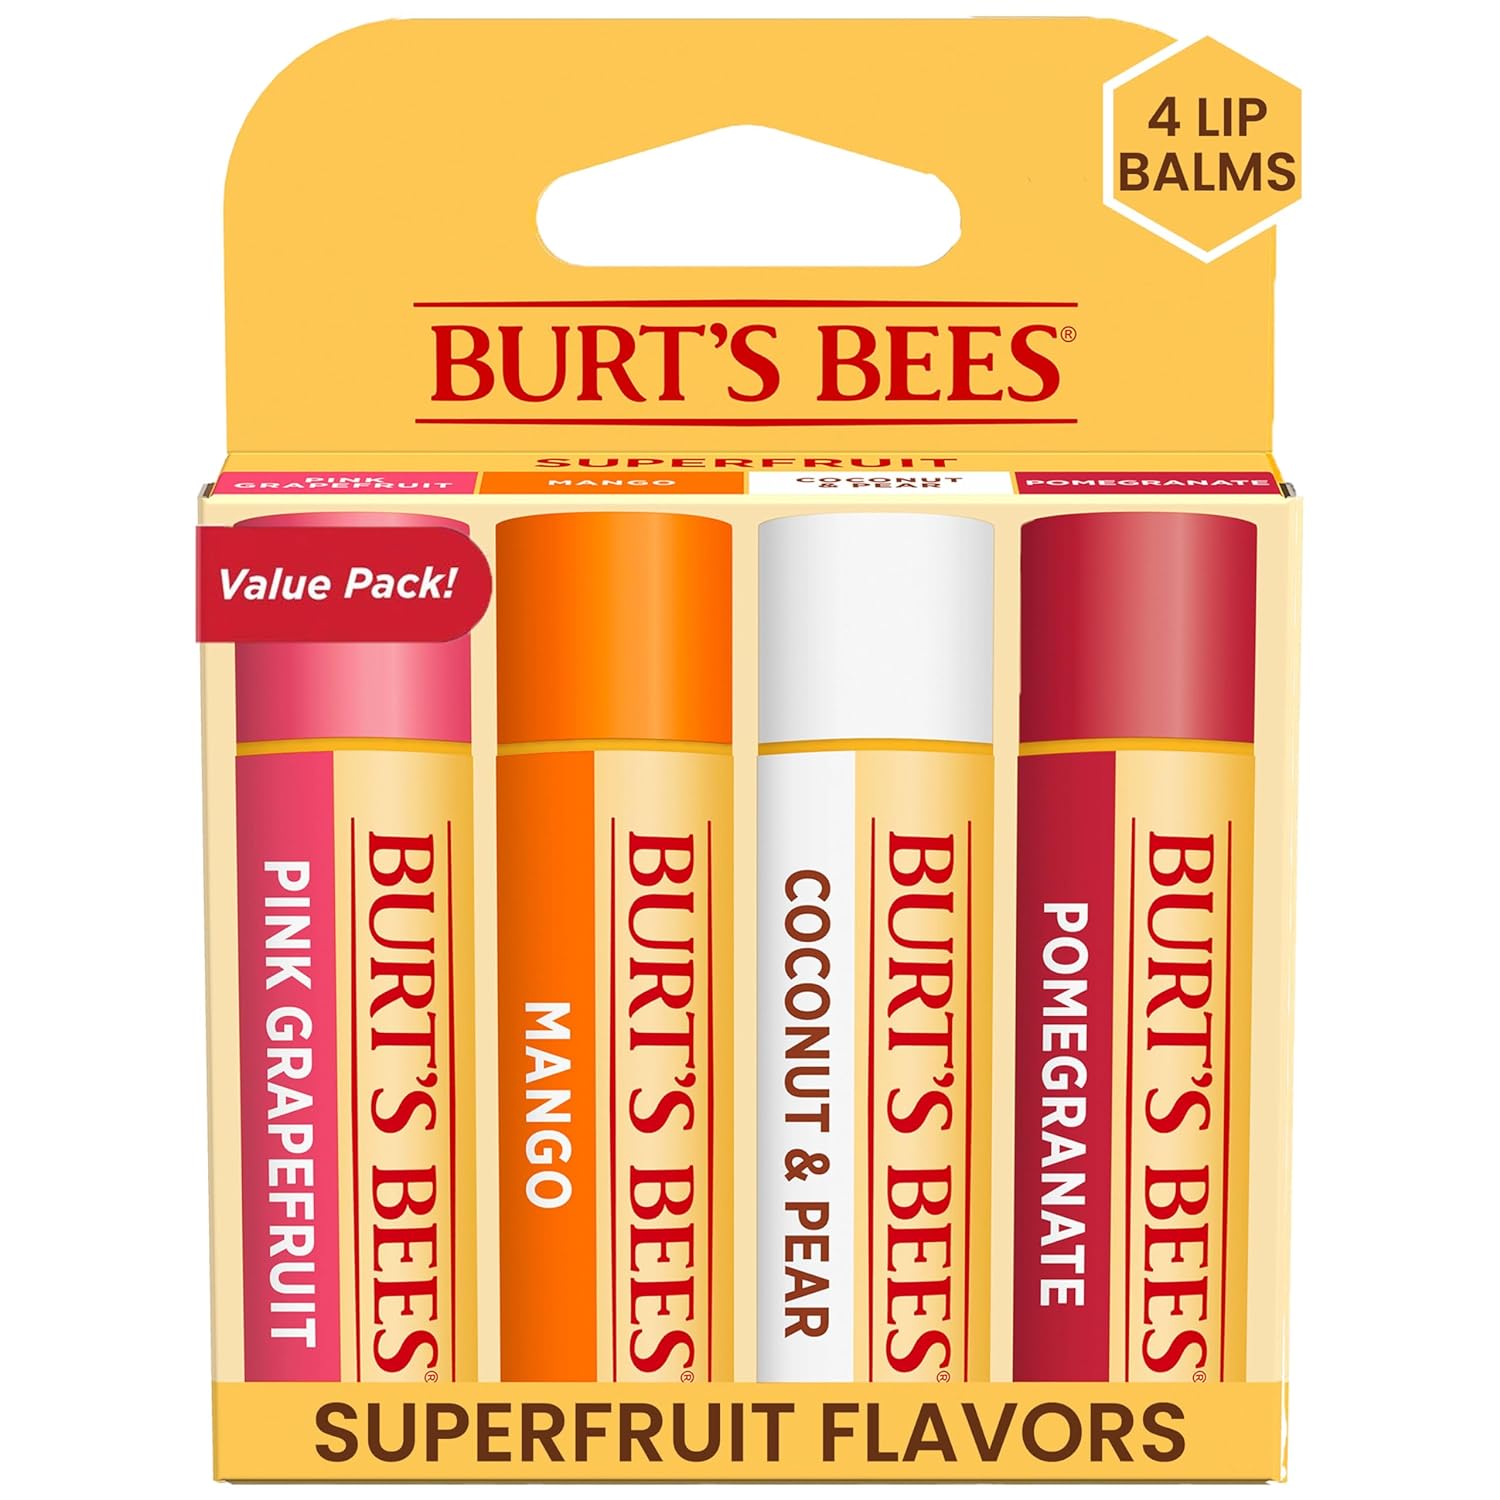 Burt’s Bees Lip Balm Valentines Day Gifts Review